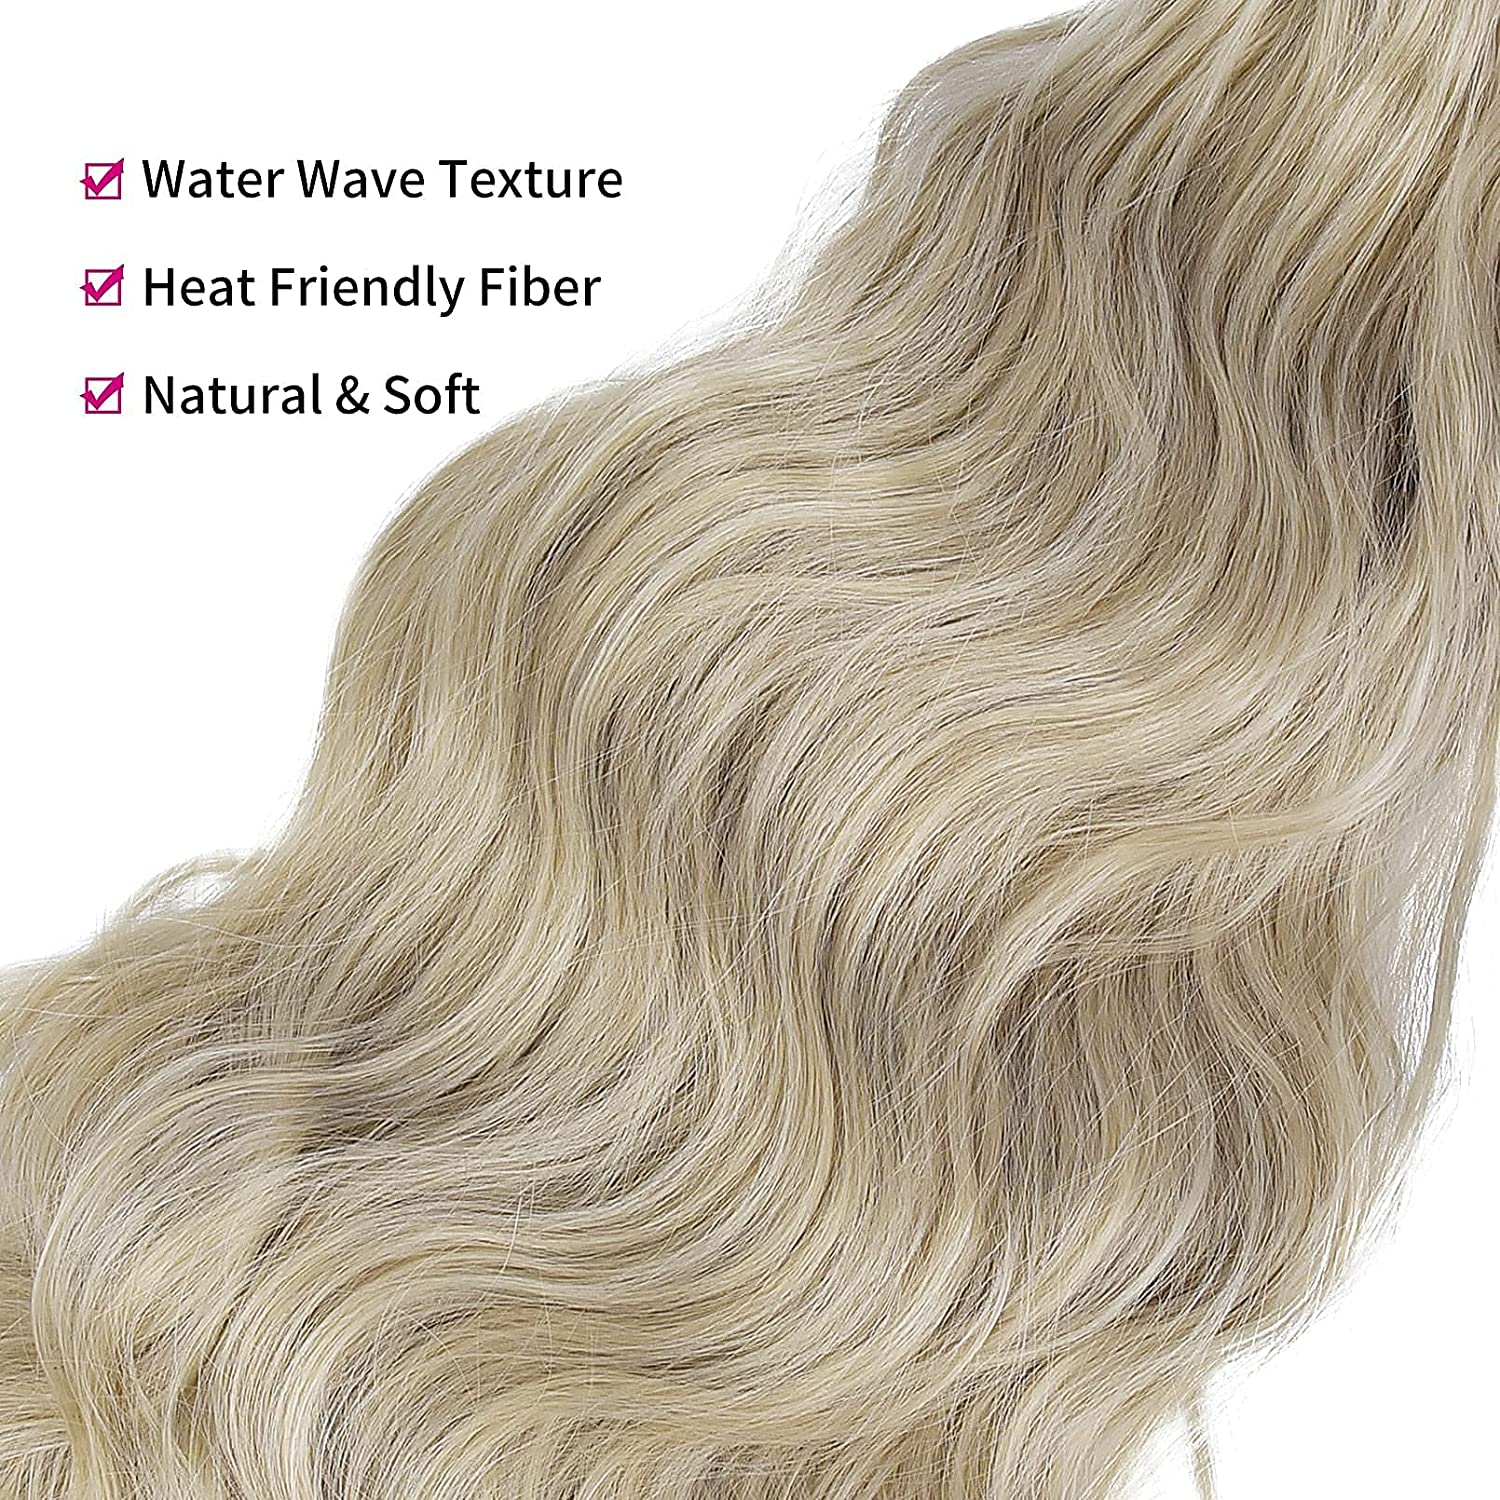 REECHO Ponytail Extension, Claw Clip in Wavy Curly Hair Extension Jaw Clip on Pony Tail Hairpiece for Women